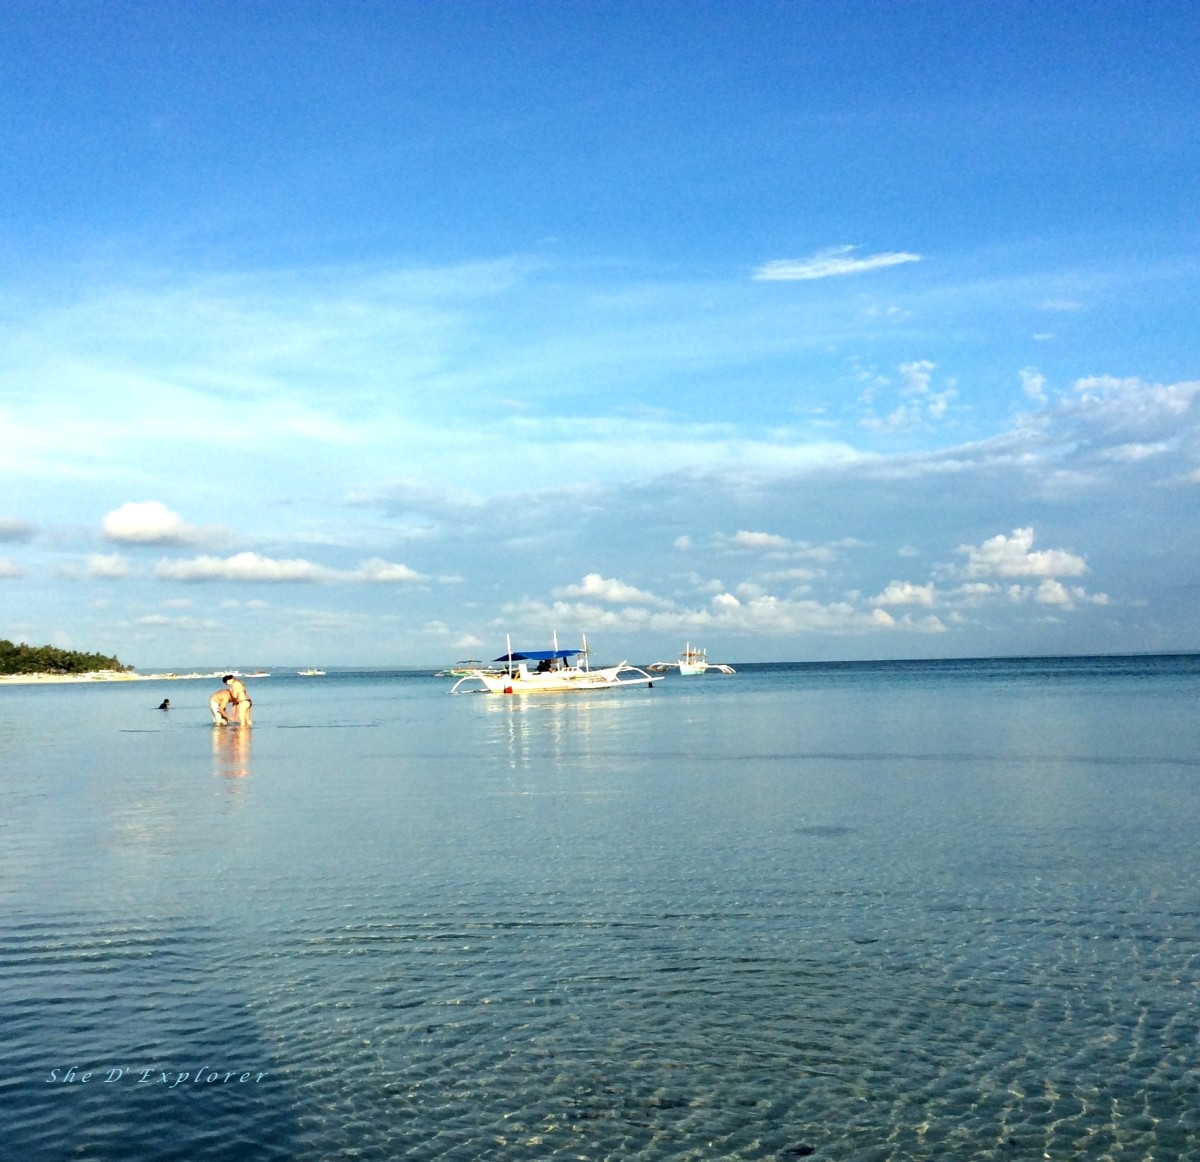 Bantayan is flocked for snorkeling, diving and other water activities.